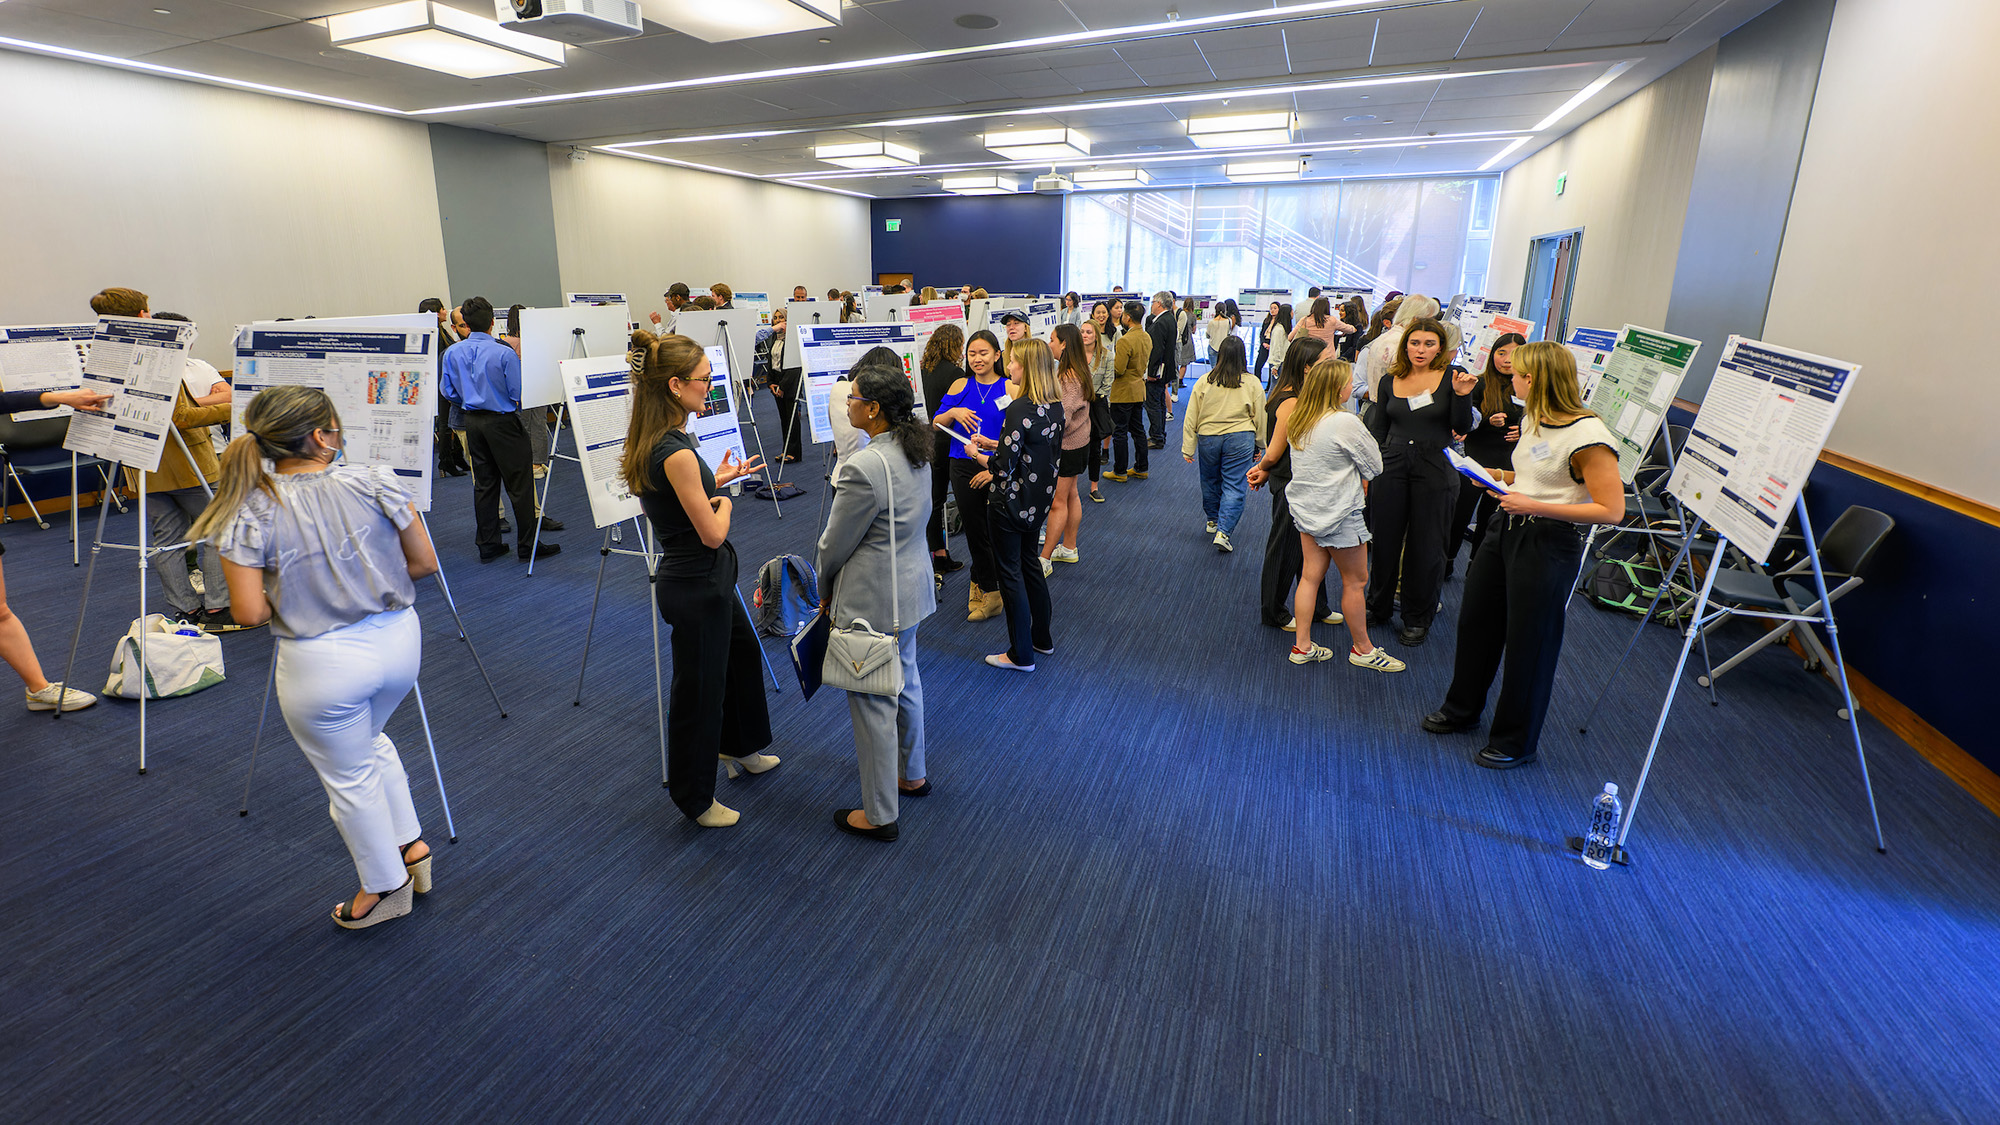 A crowd of people fill the room during the poster session for the Undergraduate Research Conference